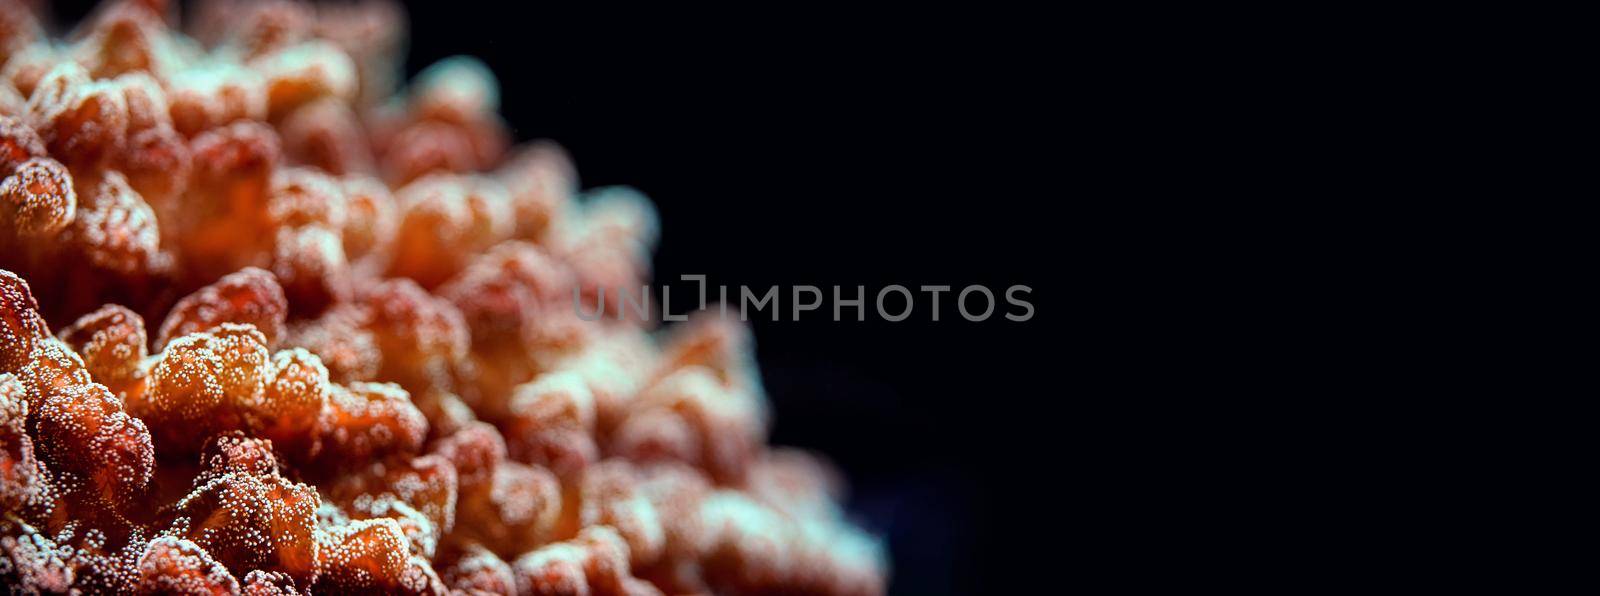 Underwater photo, close up of orange red coral emitting fluorescent light. Shallow depth of field photo - only few tentacles in focus, abstract marine background space for text right side.